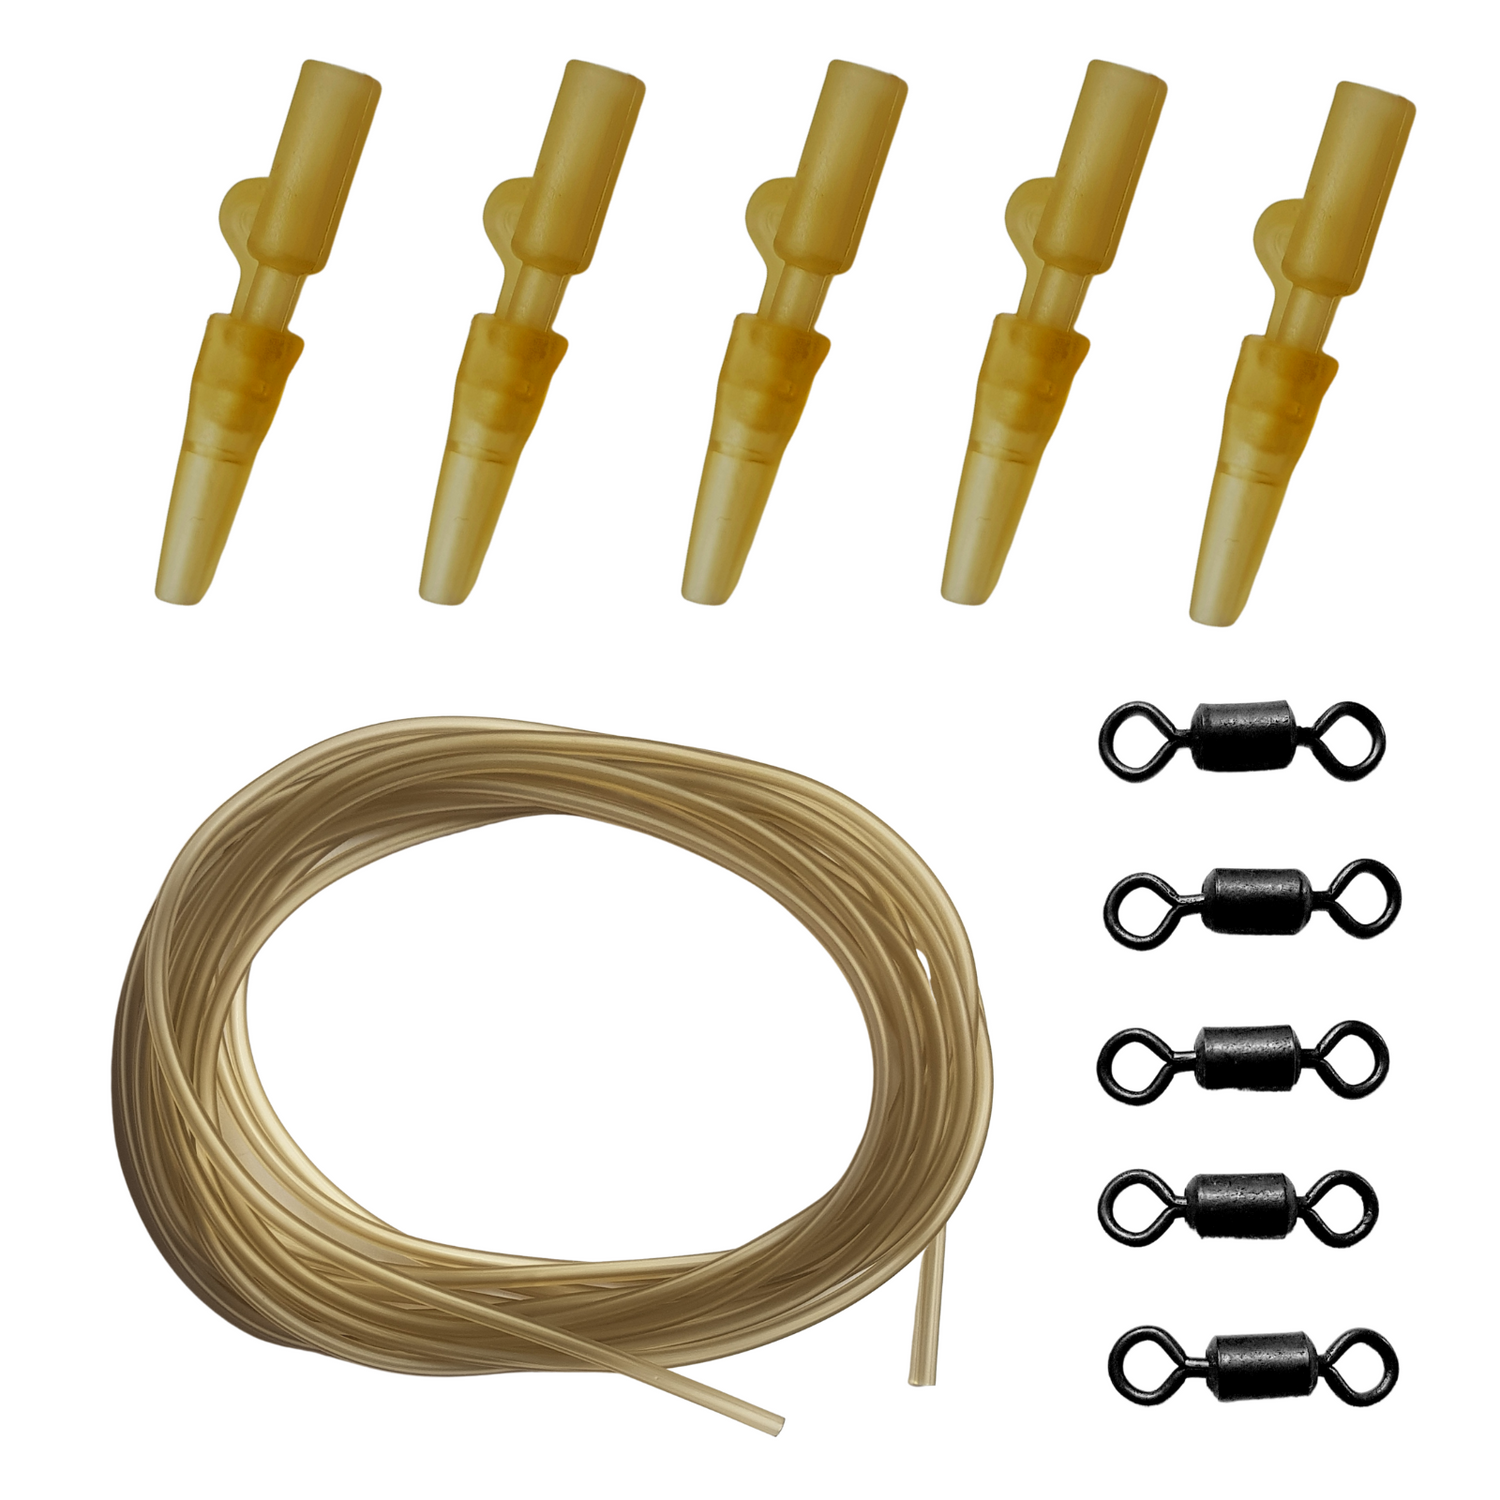 41 Piece Fishing Translucent Brown Lead Clip Action Pack Inc Clips, Swivels, Tail Rubbers 6mm Beads & Tubing